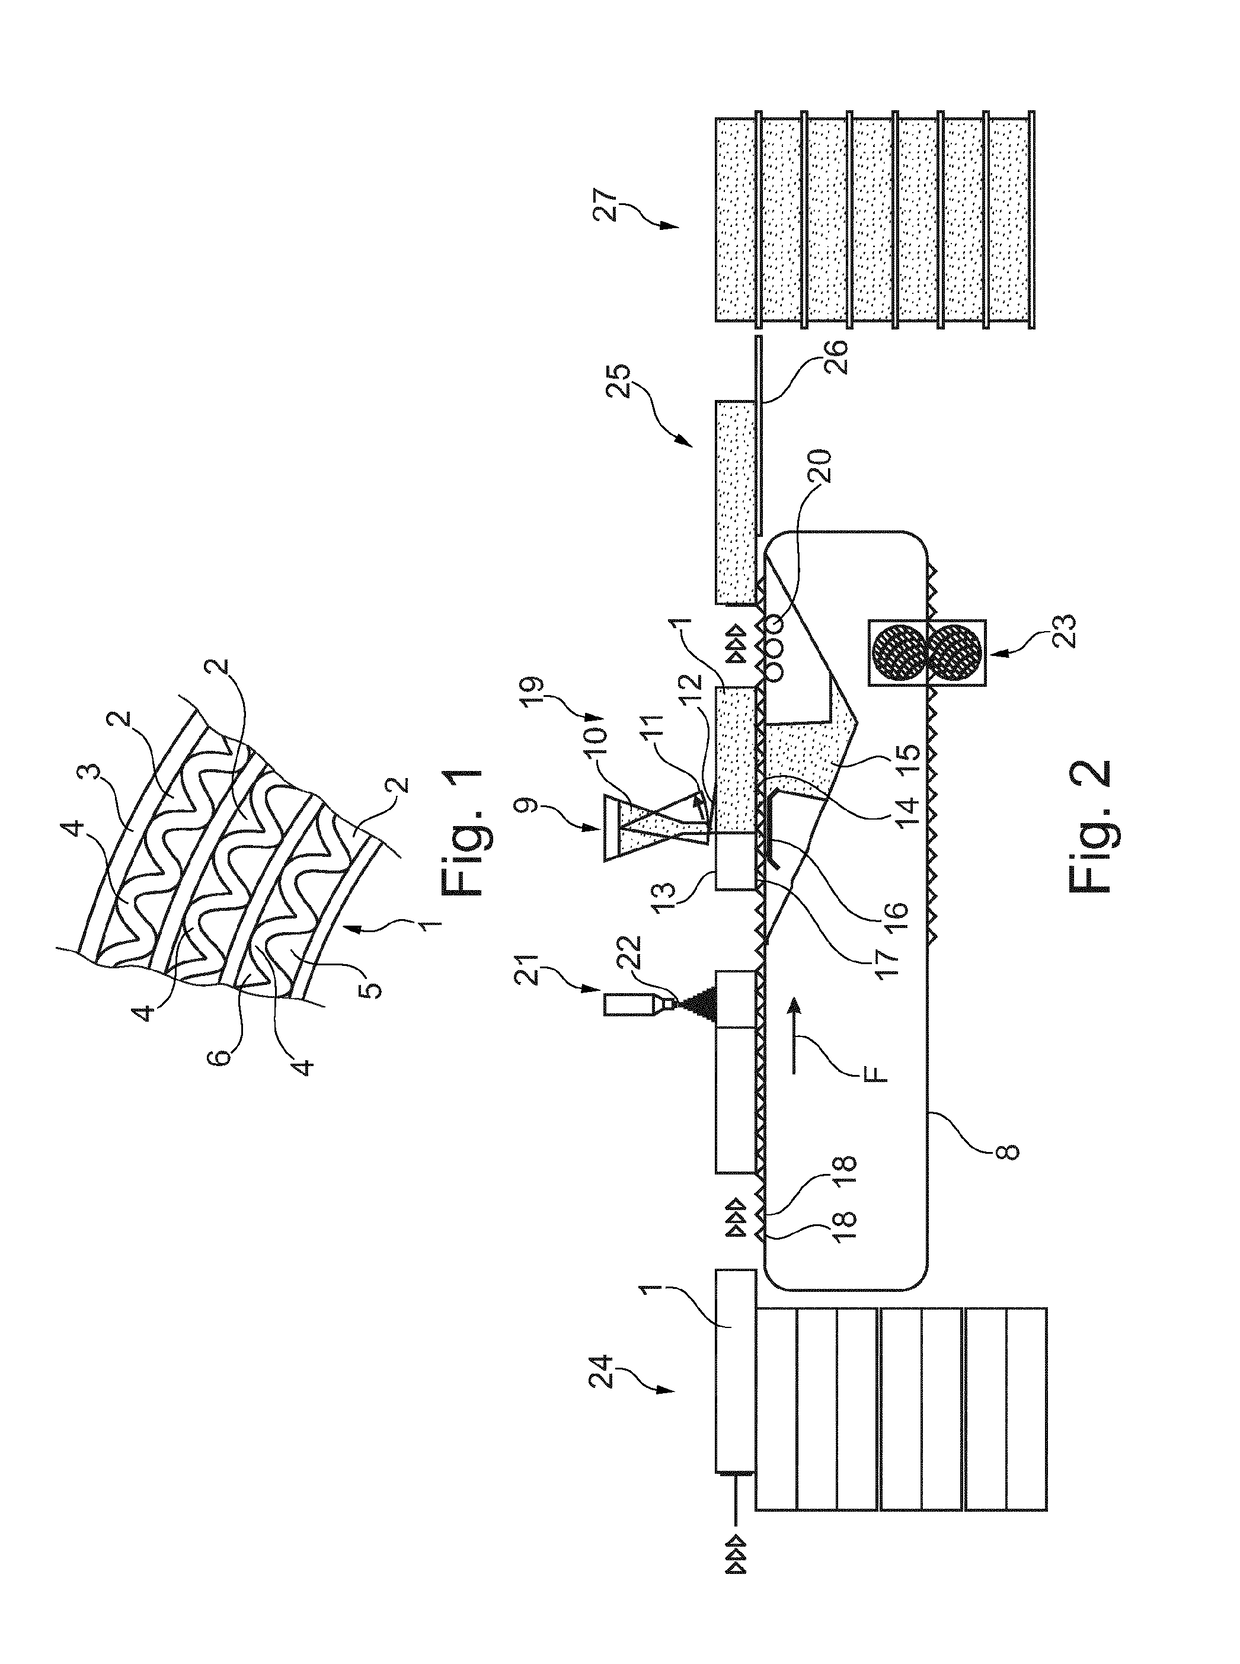 Process and apparatus for coating composite pulp honeycomb support elements